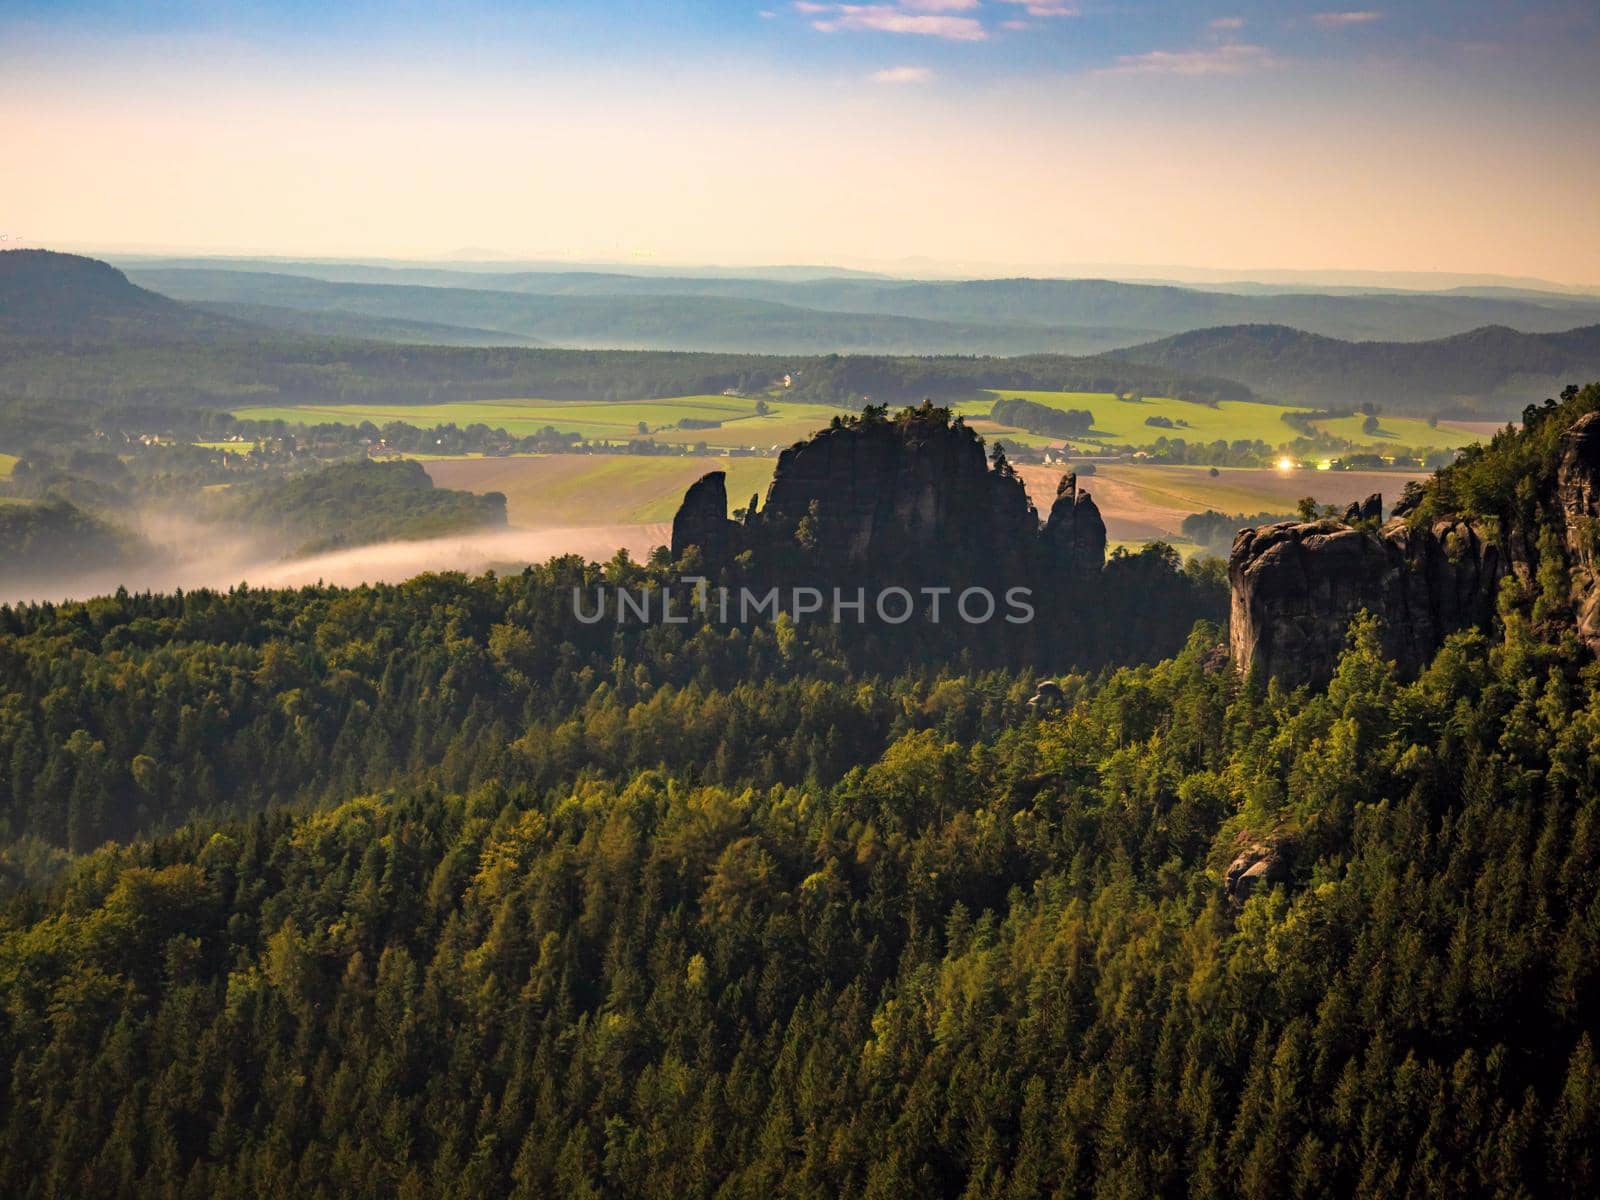 The Rauschenstein rock formations in Moon light. Rocks above Elbe River in an area known as Saxon Switzerland park near Bad Schandau, Germany. The park located in Saxony near the border to the Czech Republic, is a popular tourist destination and is known for its dramatic rock formations, hiking and rock climbing.